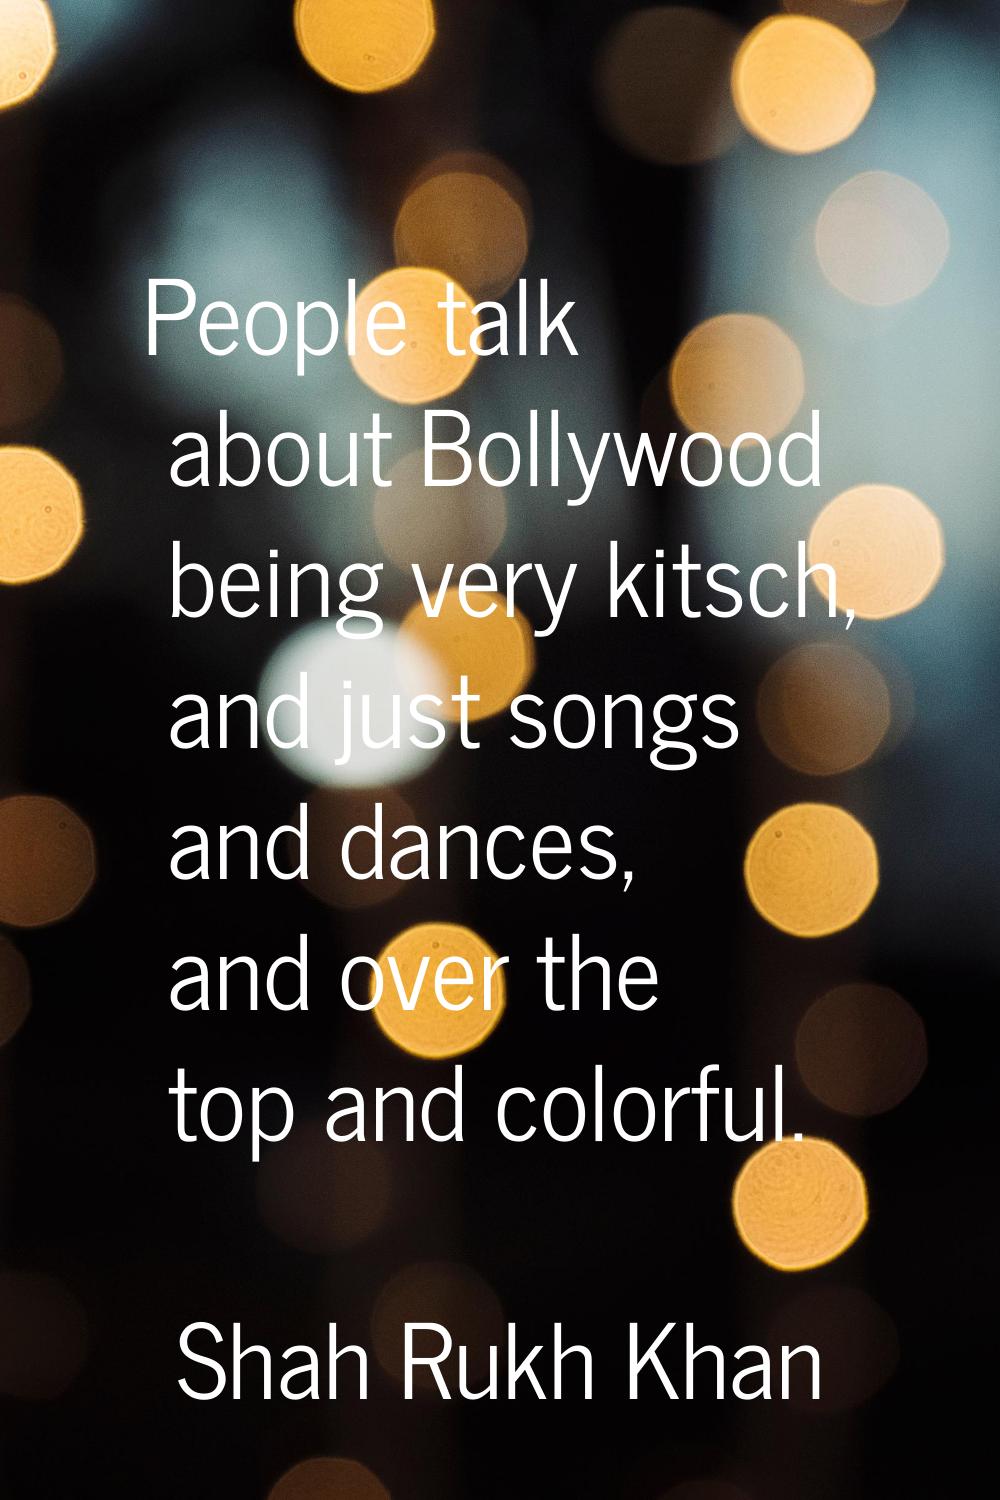 People talk about Bollywood being very kitsch, and just songs and dances, and over the top and colo